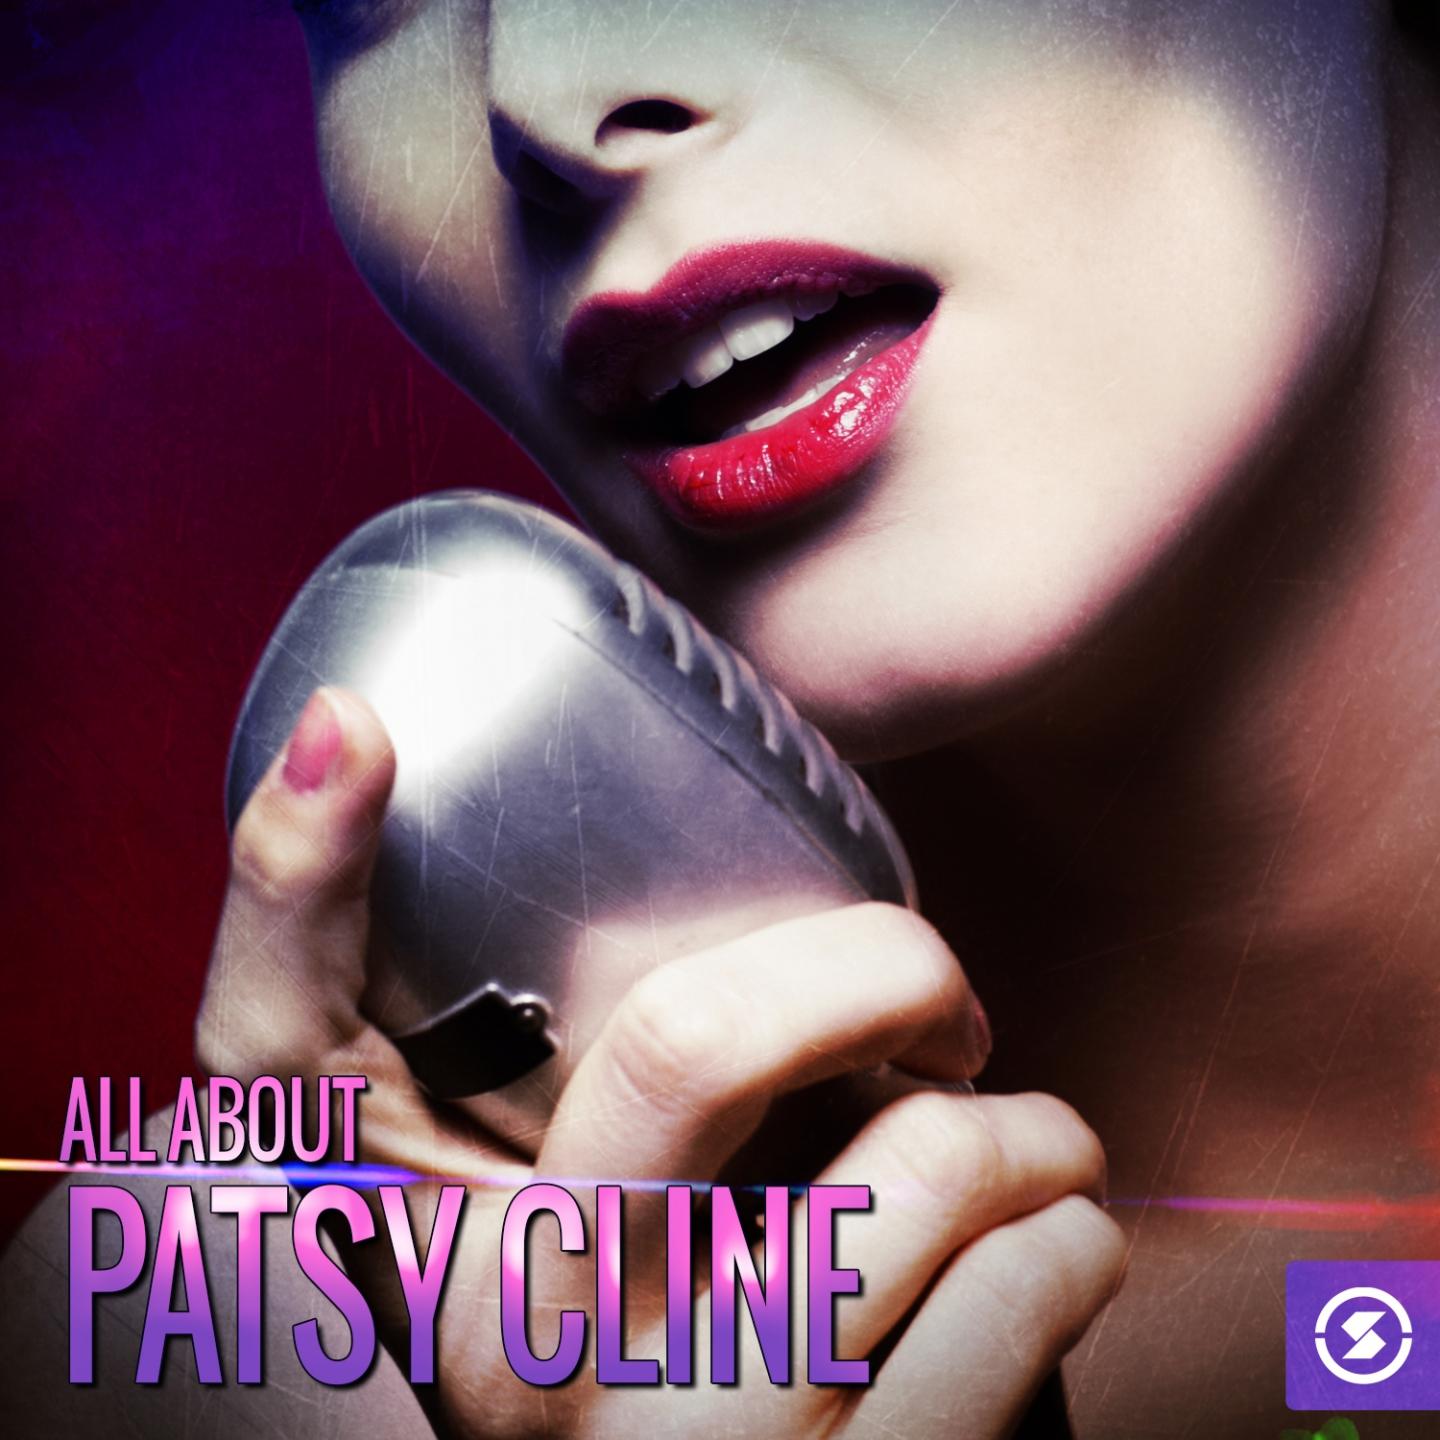 All About Patsy Cline专辑